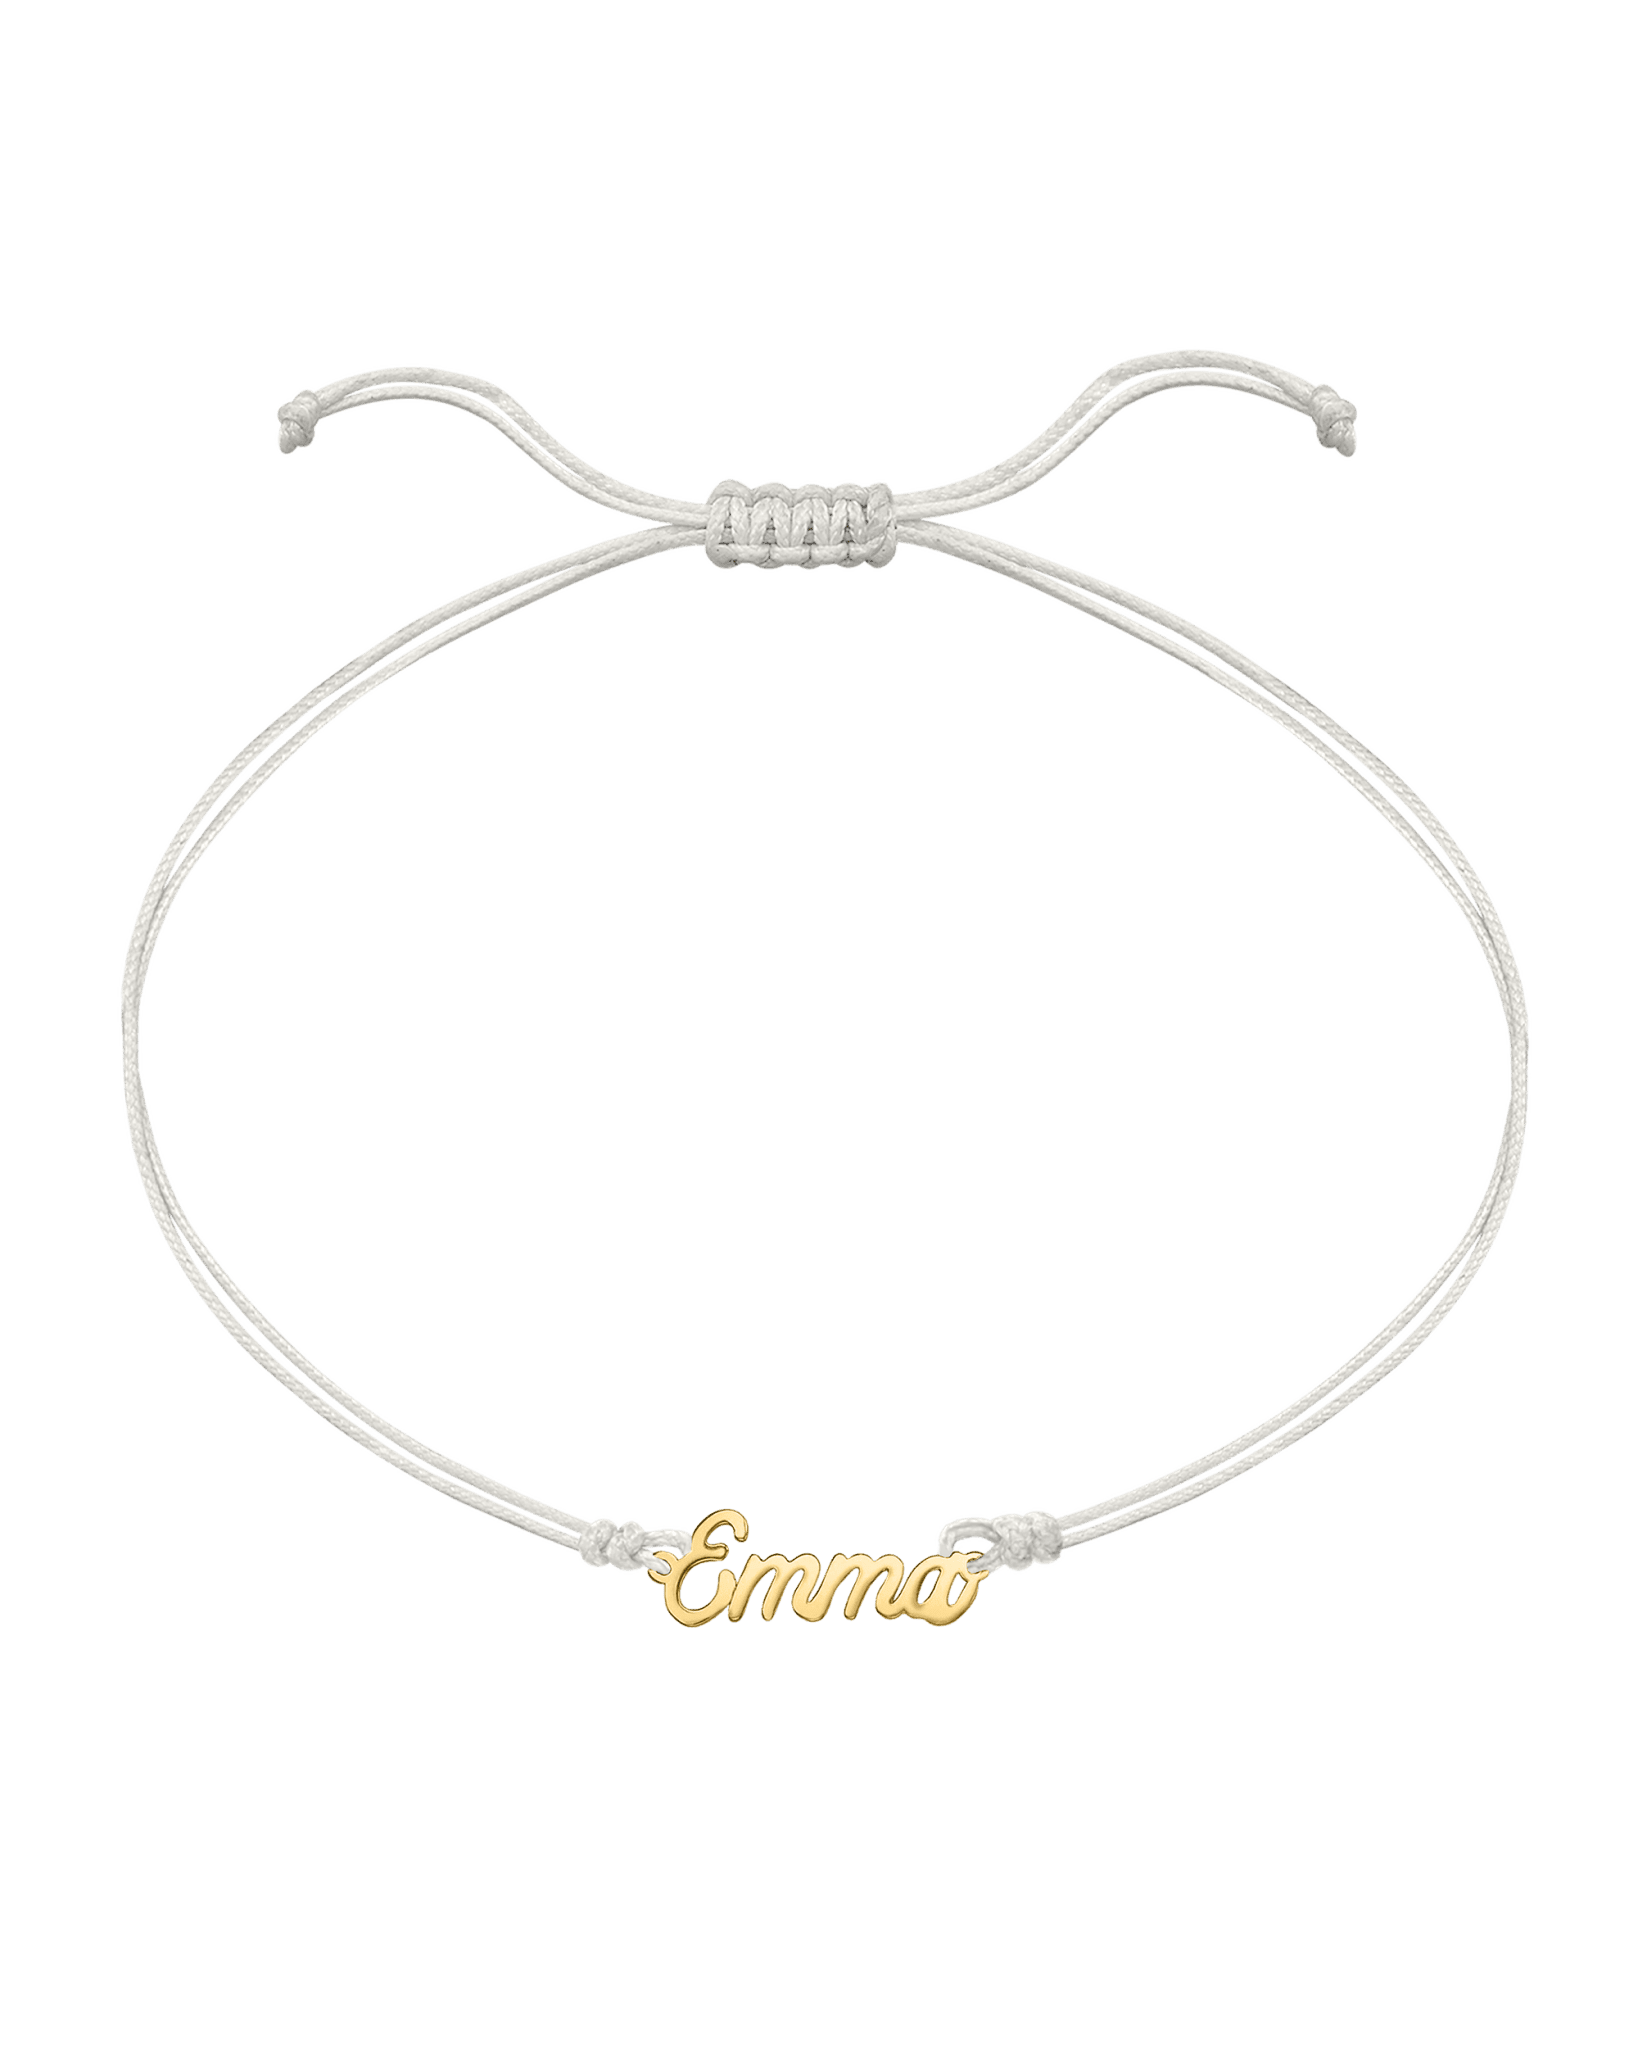 Name Plate String of Love - 14K Yellow Gold Bracelets 14K Solid Gold Pearl 1 